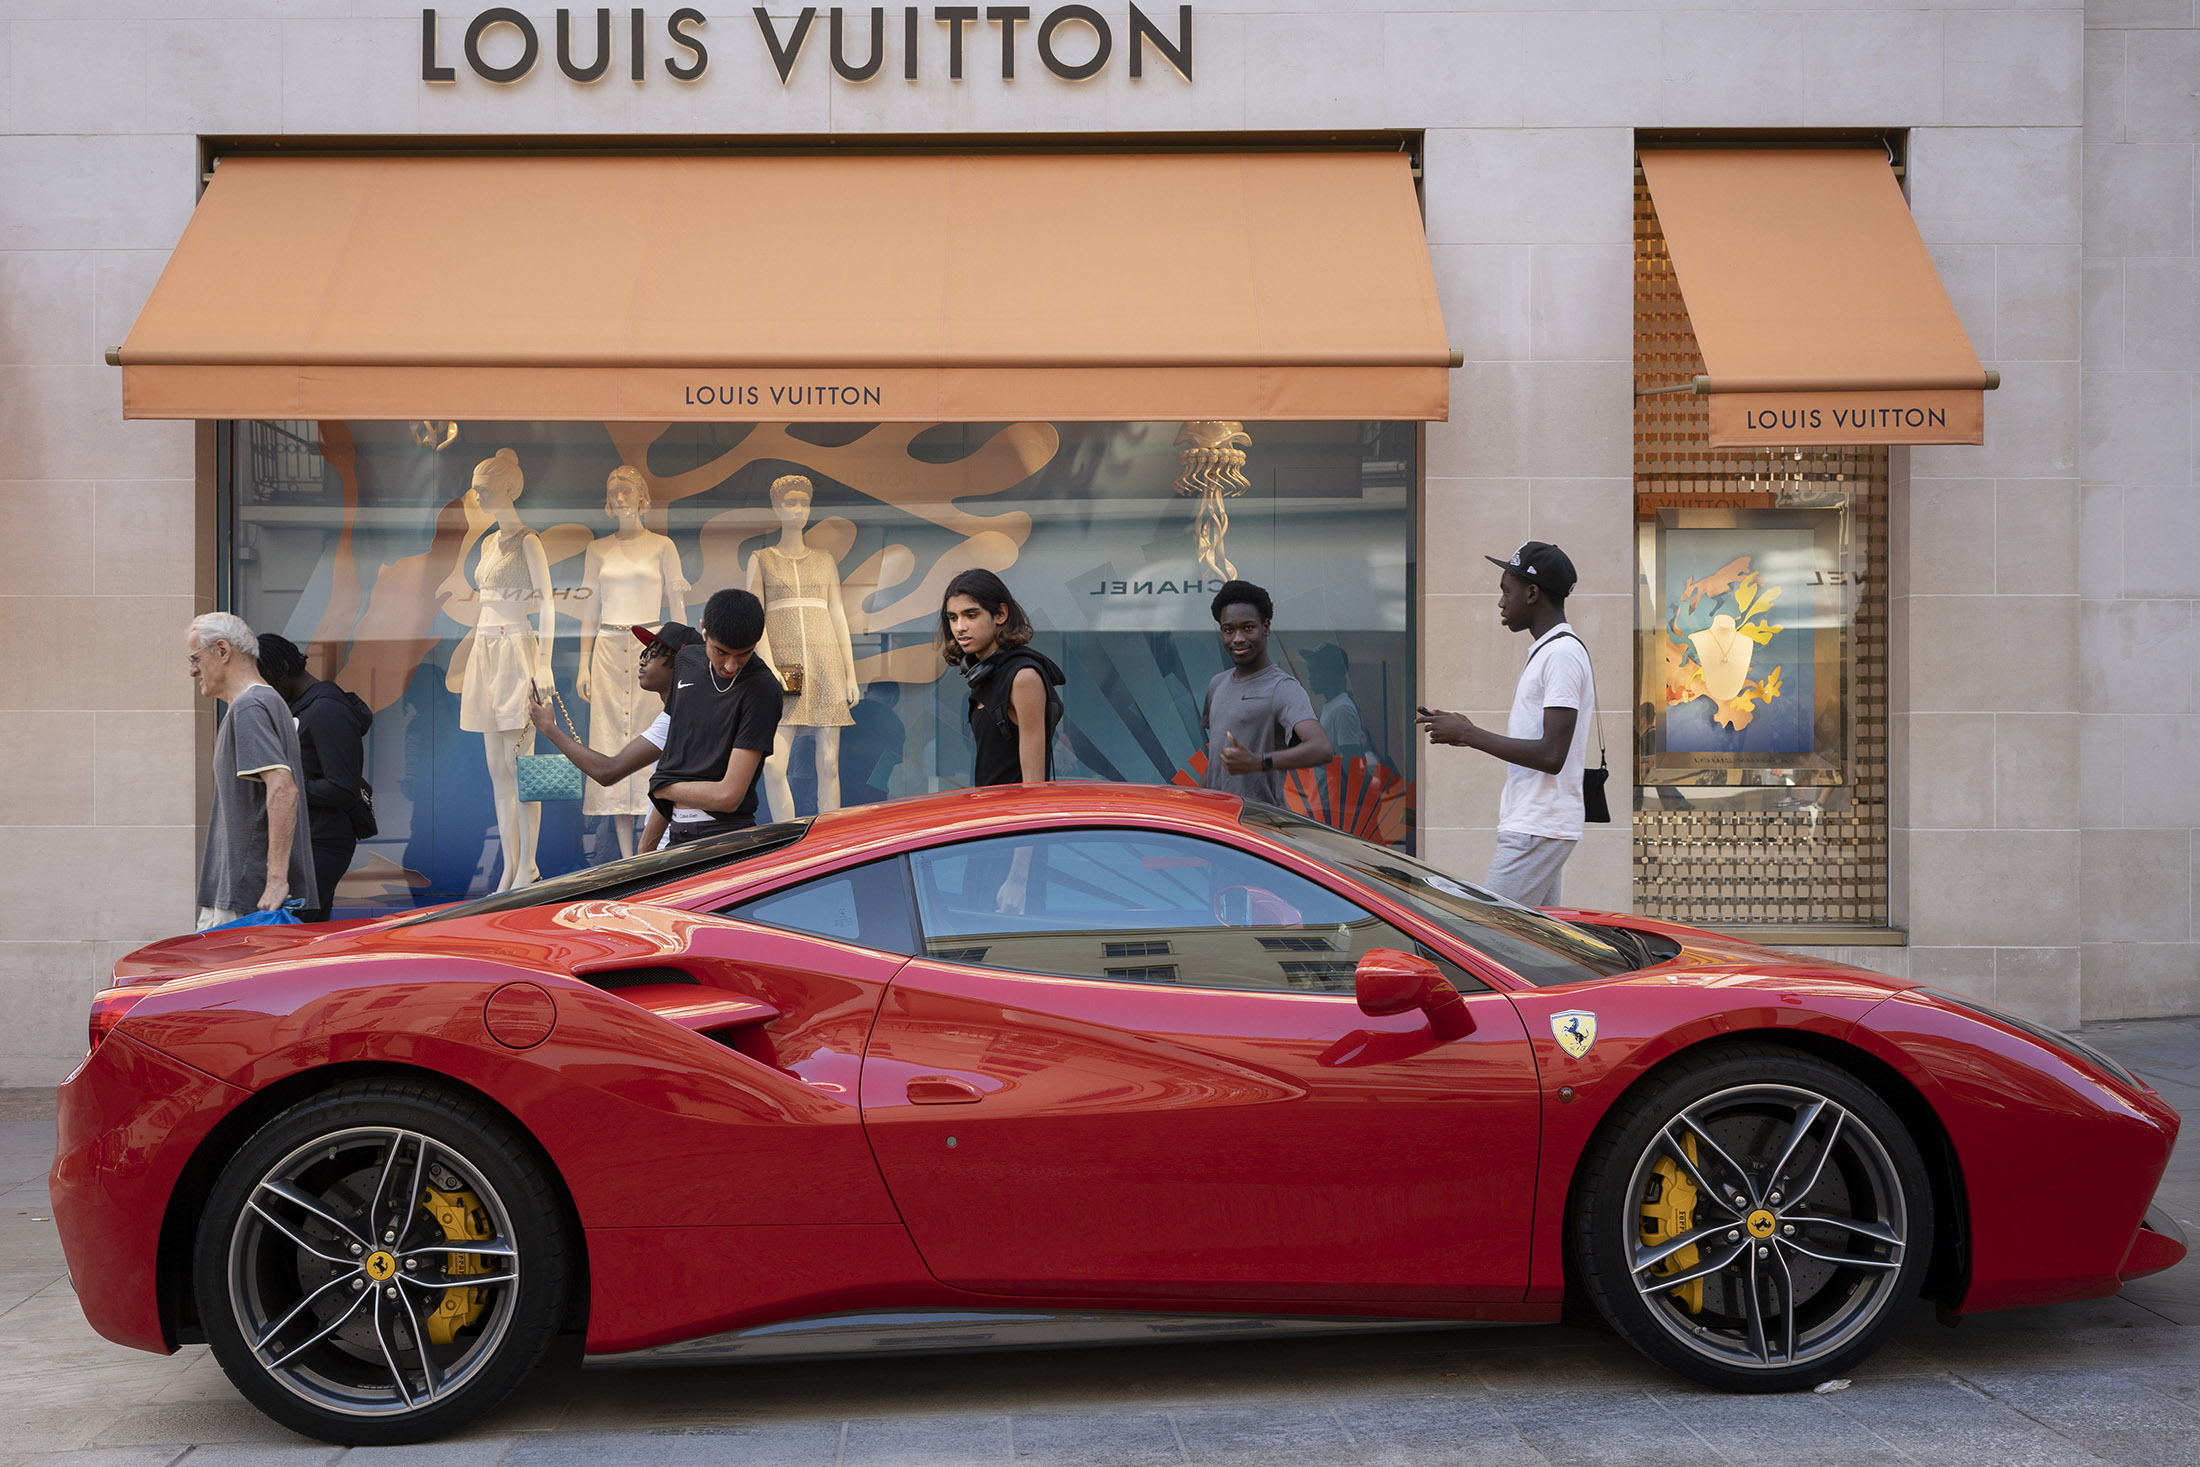 Ultra-rich still shopping for luxury despite inflation, recession